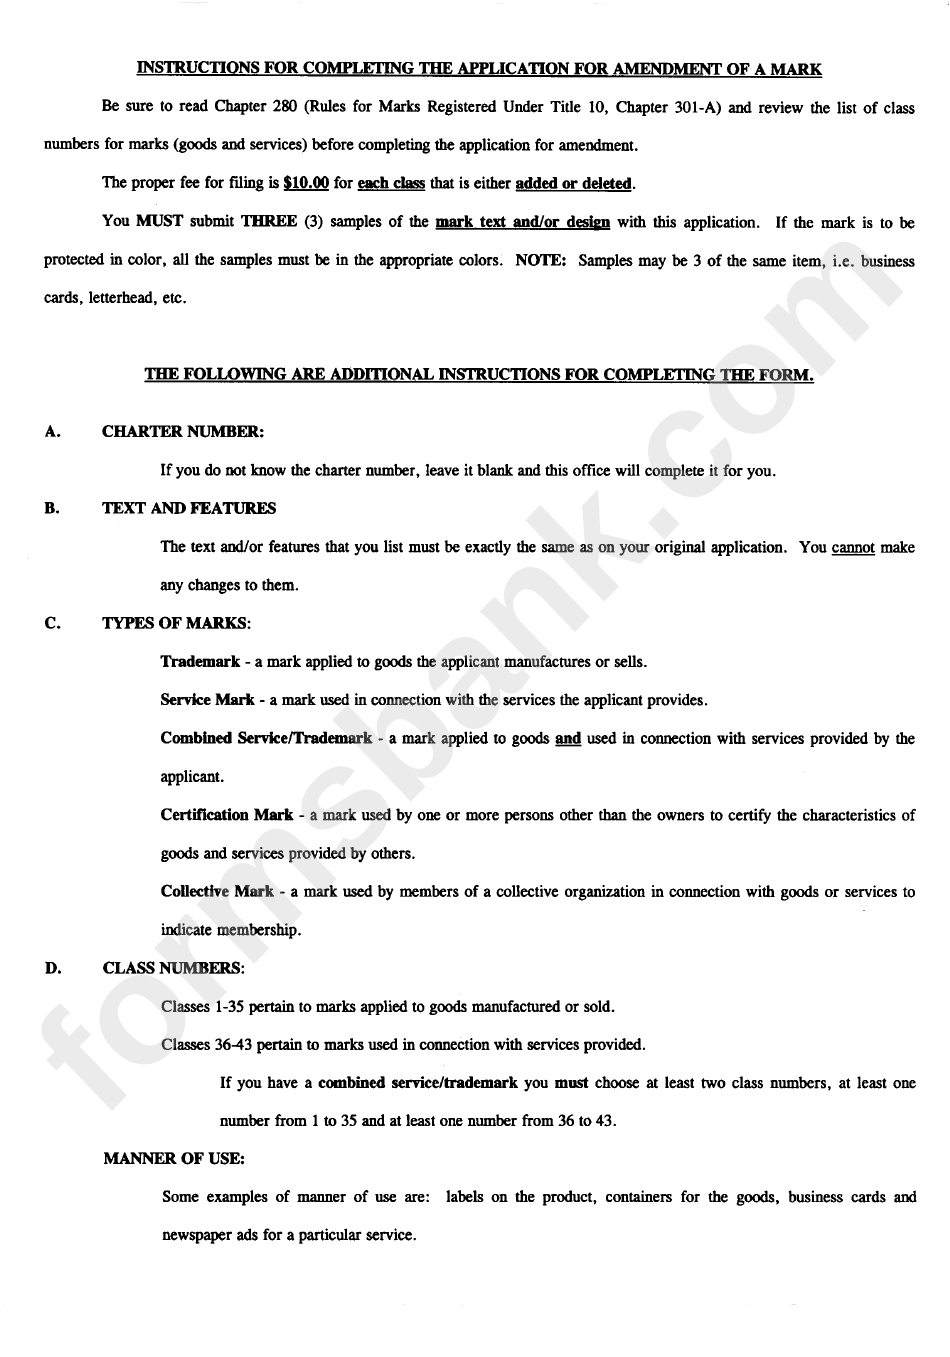 Instructions For Completing The Application For Amendmend Of Mark Sheet